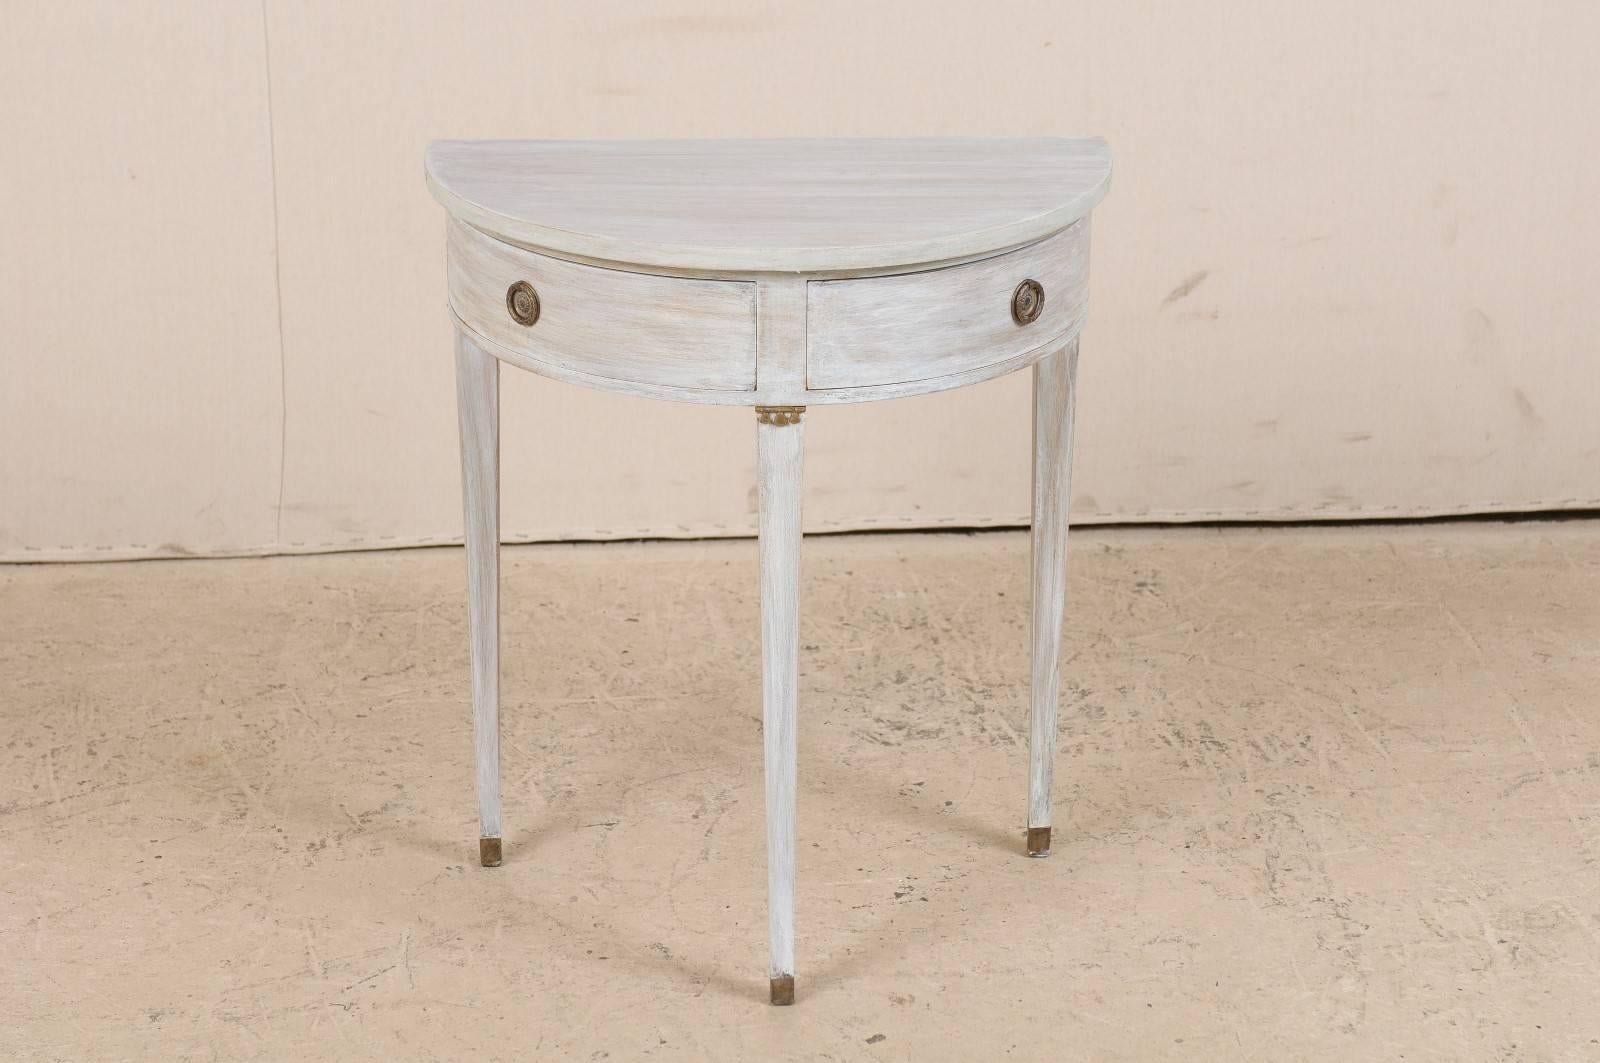 A Swedish petite demilune style table. This cute little Swedish table from the mid-20th century has two drawers and three tapered legs. This piece also features clean lines and is painted in a pale blue wash.